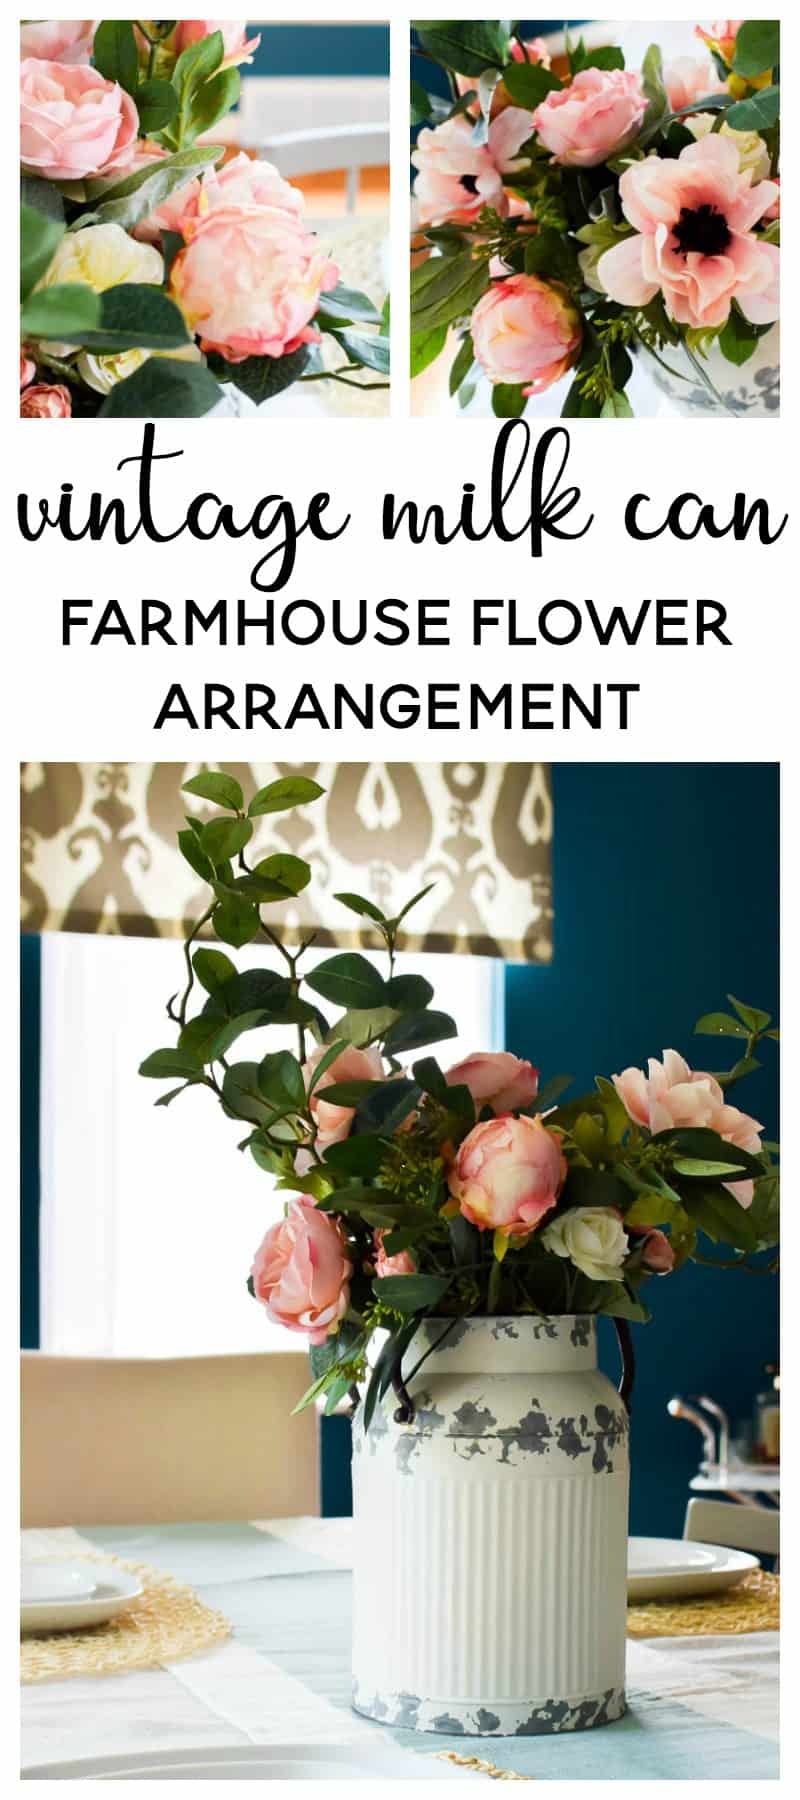 Using a vintage milk can to make a farmhouse flower arrangement is an easy thing to do with this tutorial